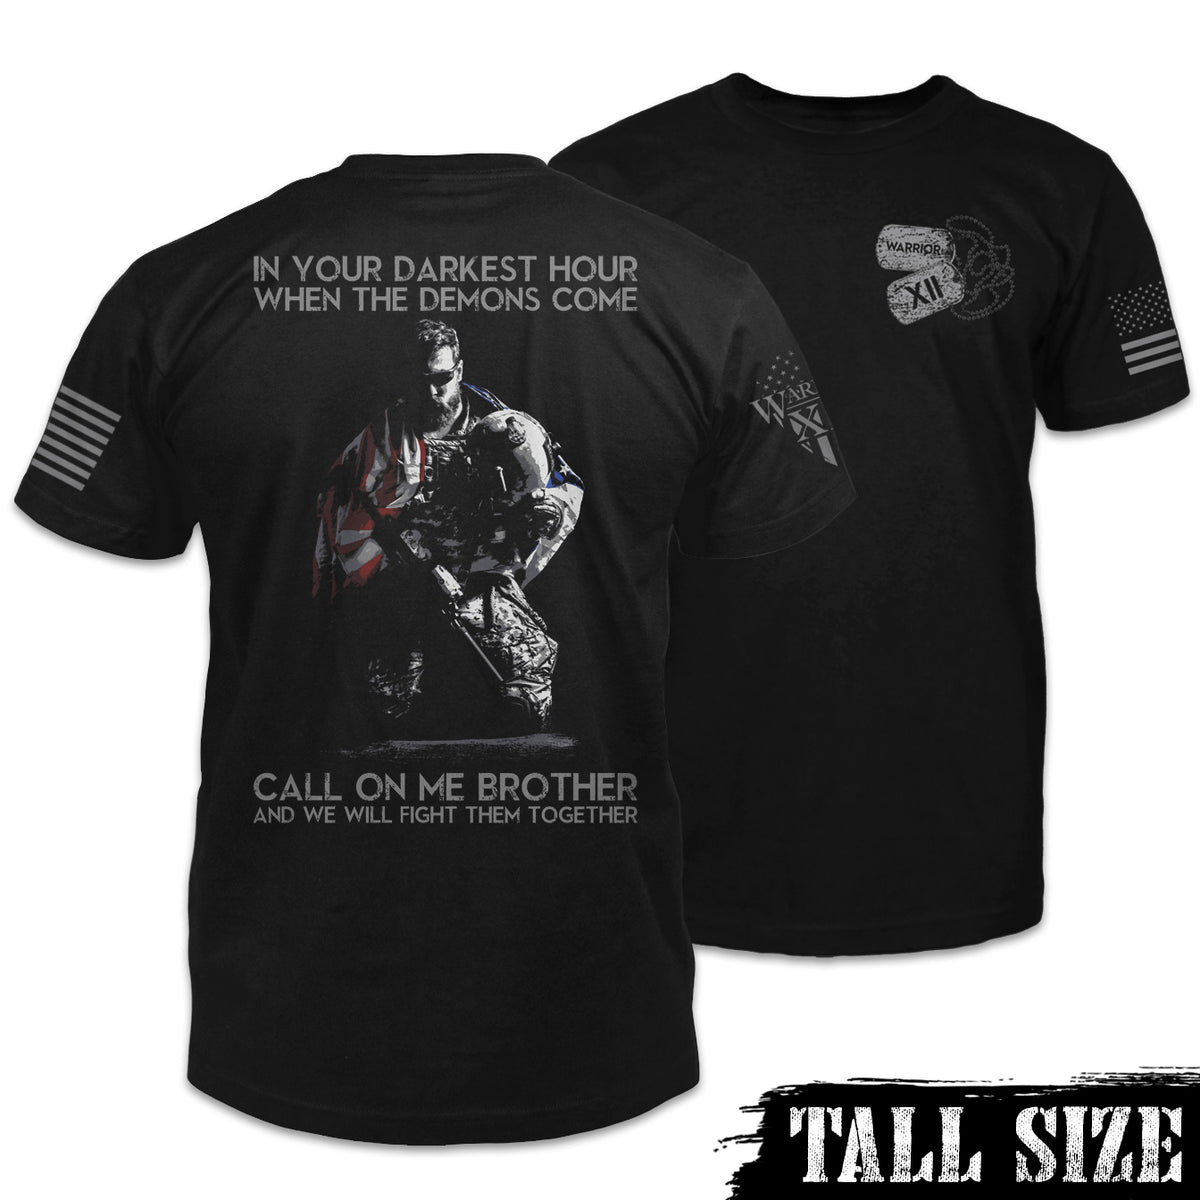 Front & back black tall size shirt with the words "In your darkest hour when the demons come, call on me, brother, and we will fight them together" with a soldier printed on the shirt.